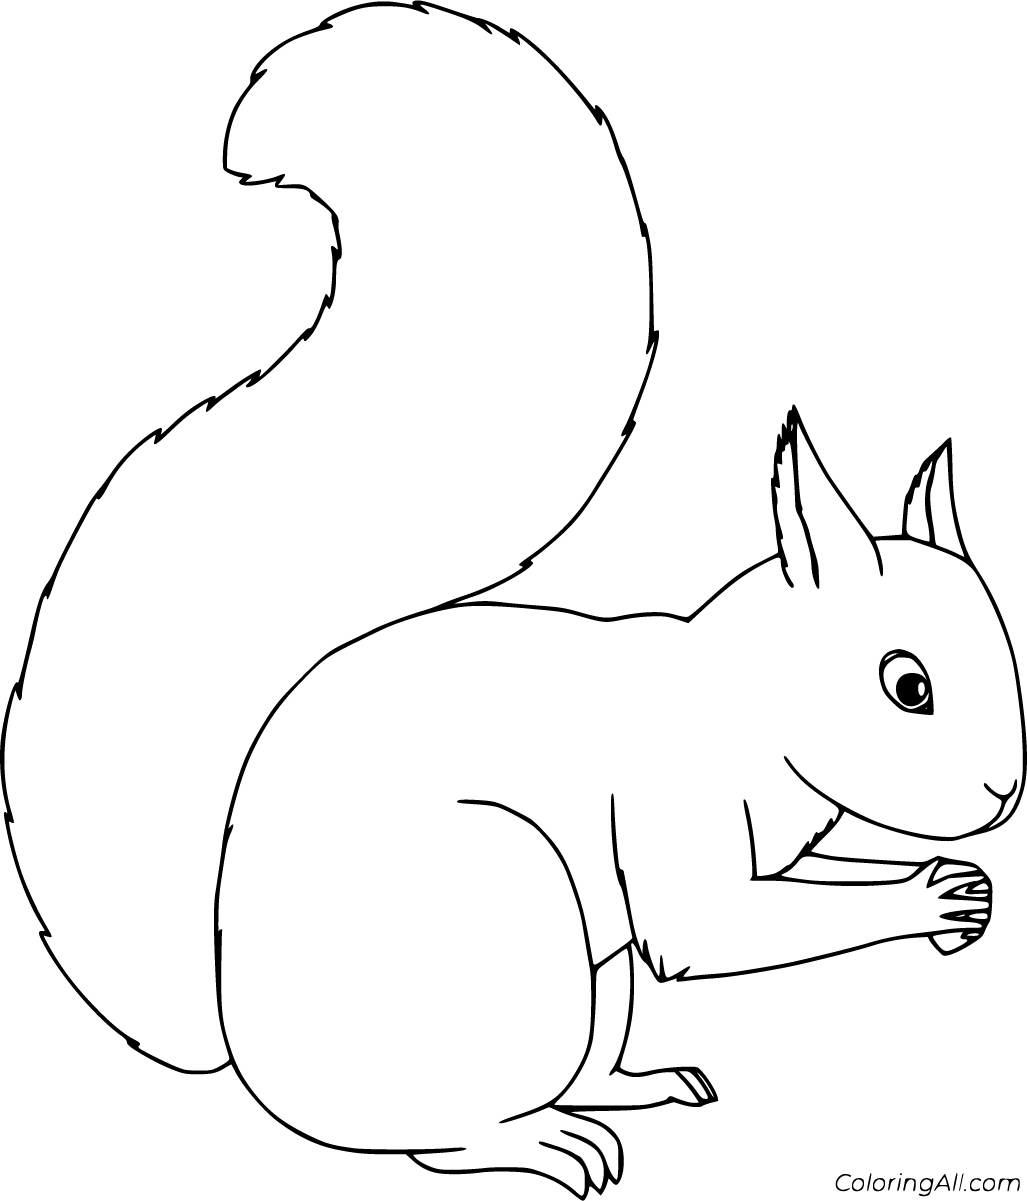 How to Draw a Simple Squirrel for Kids